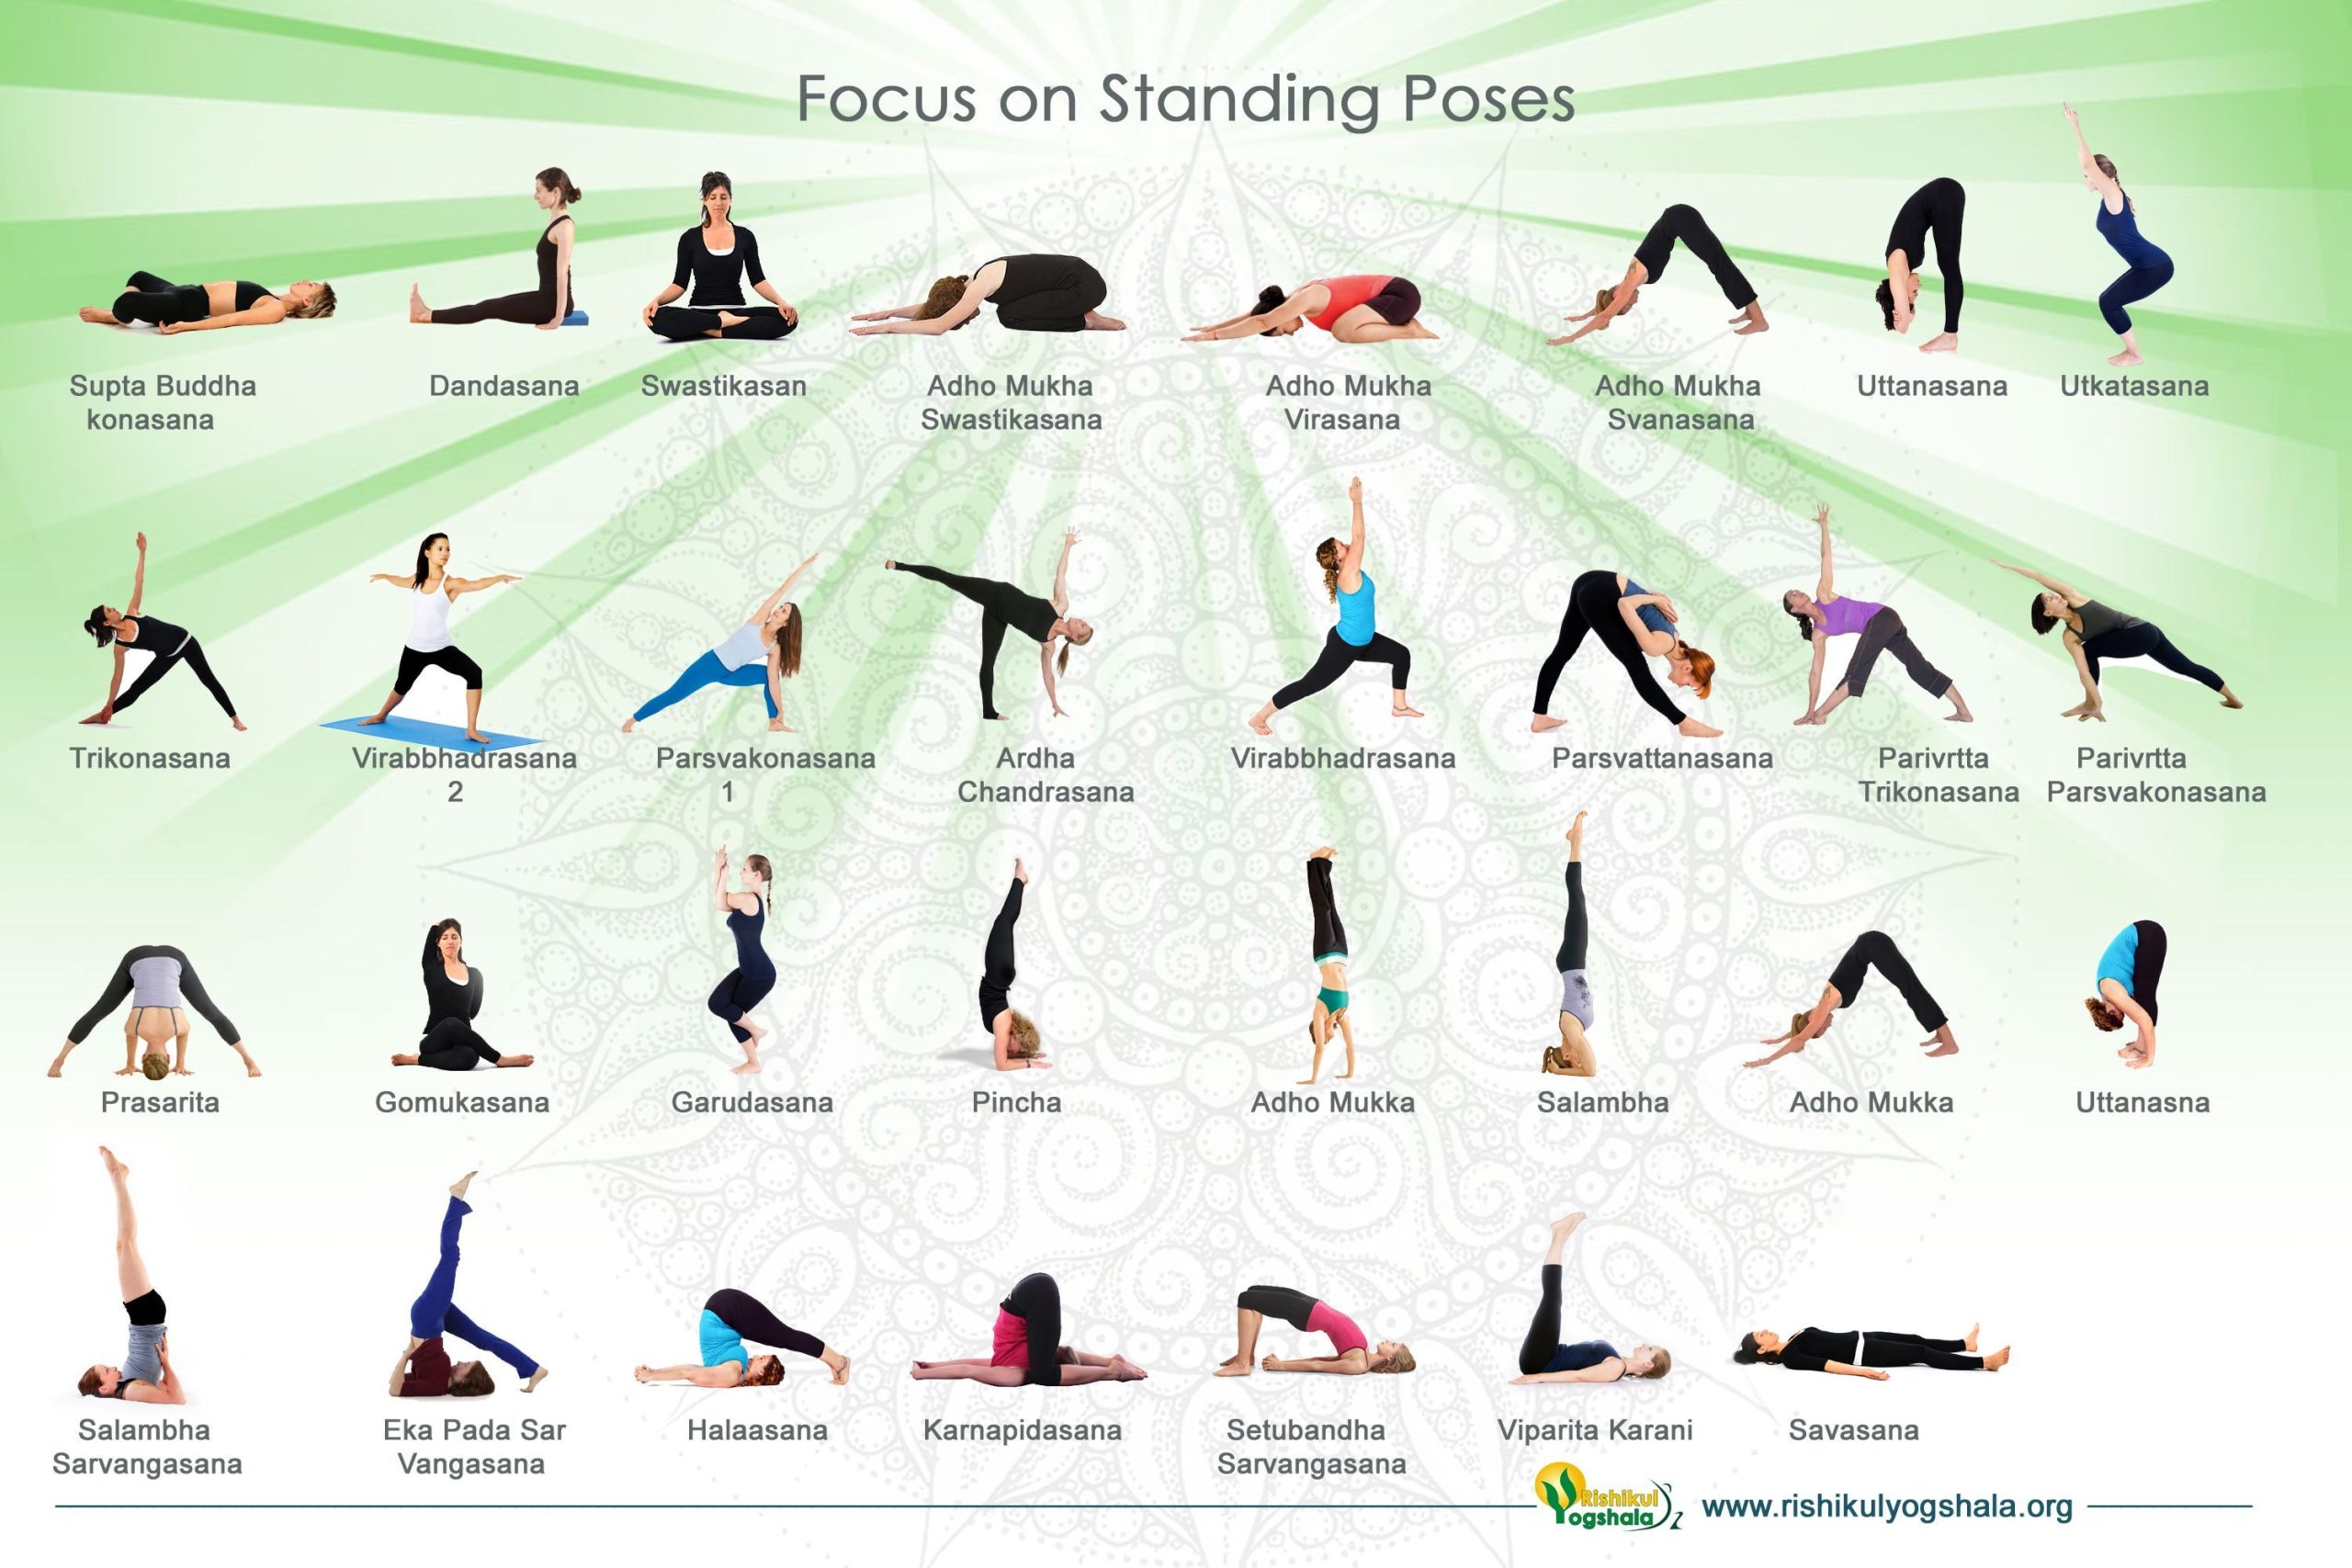 Exploring Different Types of Yoga Practices